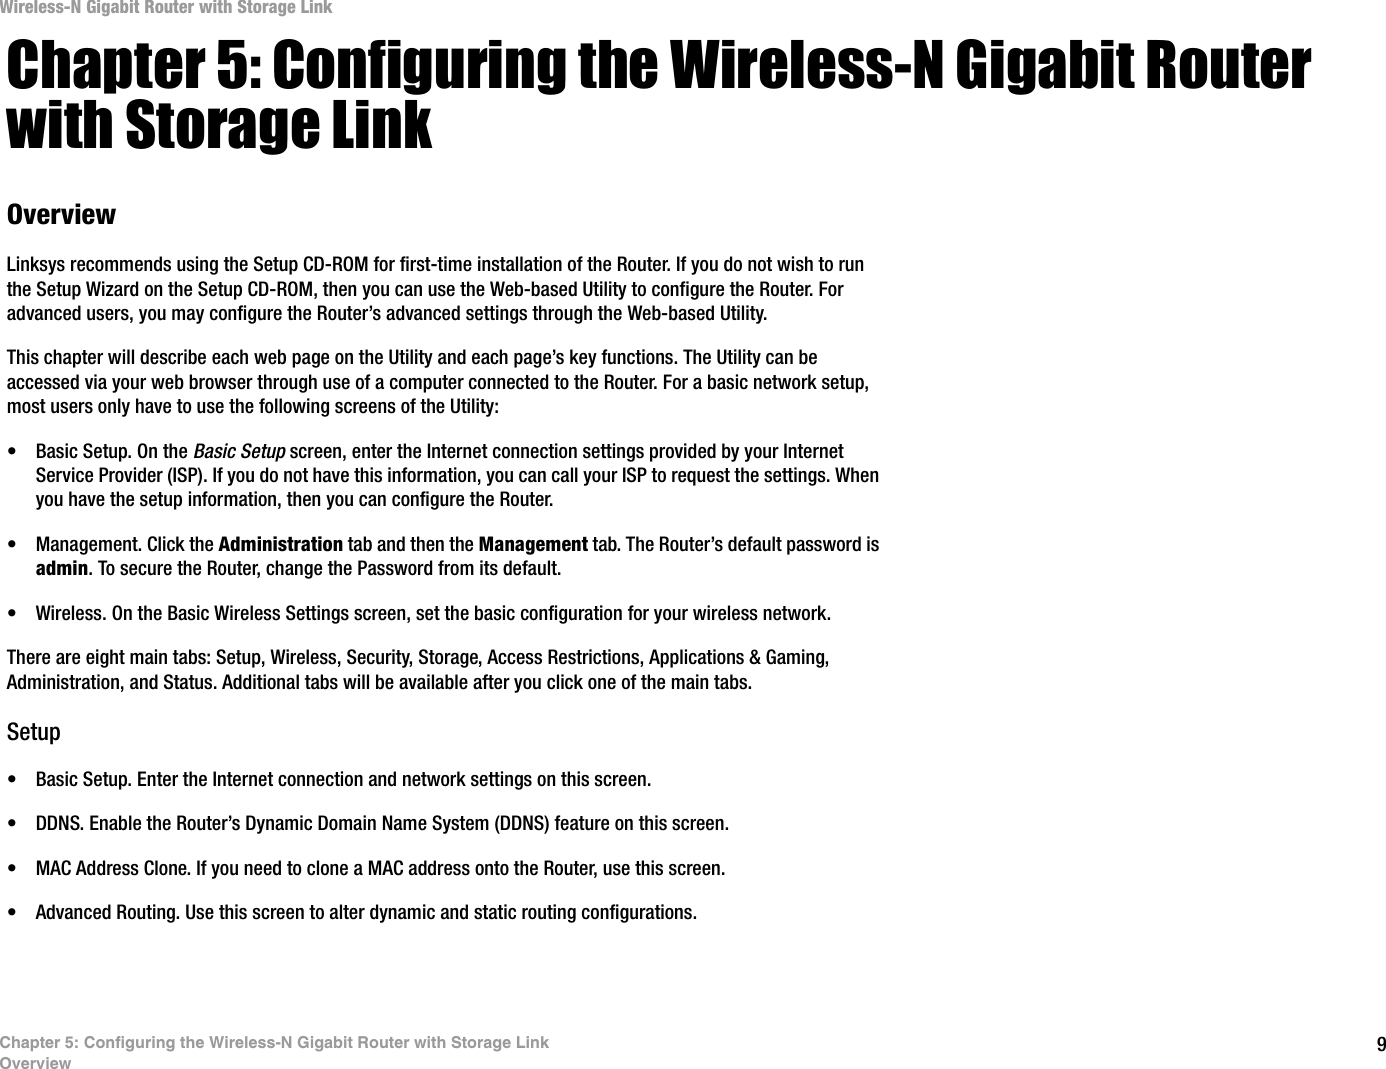 9Chapter 5: Configuring the Wireless-N Gigabit Router with Storage LinkOverviewWireless-N Gigabit Router with Storage LinkChapter 5: Configuring the Wireless-N Gigabit Router with Storage LinkOverviewLinksys recommends using the Setup CD-ROM for first-time installation of the Router. If you do not wish to run the Setup Wizard on the Setup CD-ROM, then you can use the Web-based Utility to configure the Router. For advanced users, you may configure the Router’s advanced settings through the Web-based Utility.This chapter will describe each web page on the Utility and each page’s key functions. The Utility can be accessed via your web browser through use of a computer connected to the Router. For a basic network setup, most users only have to use the following screens of the Utility:• Basic Setup. On the Basic Setup screen, enter the Internet connection settings provided by your Internet Service Provider (ISP). If you do not have this information, you can call your ISP to request the settings. When you have the setup information, then you can configure the Router.• Management. Click the Administration tab and then the Management tab. The Router’s default password is admin. To secure the Router, change the Password from its default.• Wireless. On the Basic Wireless Settings screen, set the basic configuration for your wireless network.There are eight main tabs: Setup, Wireless, Security, Storage, Access Restrictions, Applications &amp; Gaming, Administration, and Status. Additional tabs will be available after you click one of the main tabs.Setup• Basic Setup. Enter the Internet connection and network settings on this screen.• DDNS. Enable the Router’s Dynamic Domain Name System (DDNS) feature on this screen.• MAC Address Clone. If you need to clone a MAC address onto the Router, use this screen.• Advanced Routing. Use this screen to alter dynamic and static routing configurations.